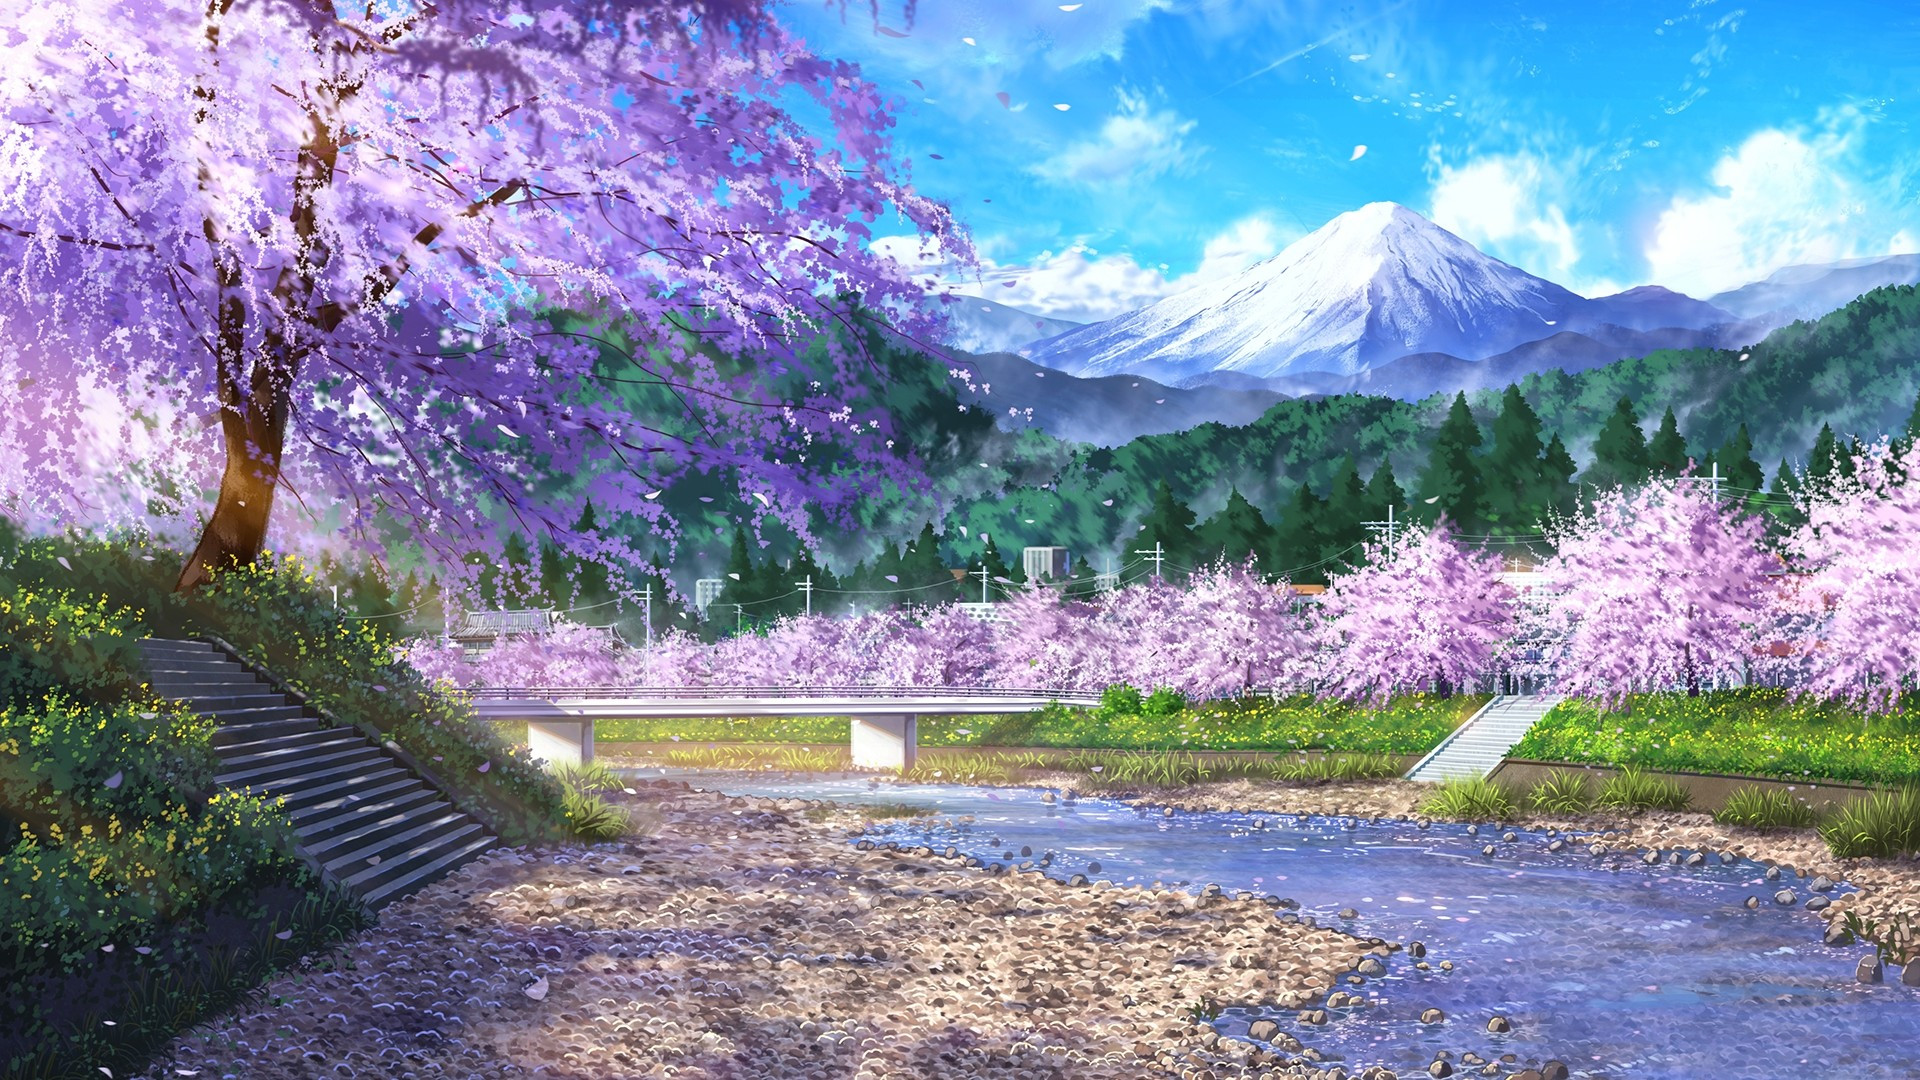 Download 1920x1080 Anime Landscape, Flowers, Scenic, Cherry Blossom, Stairs, River Wallpaper for Widescreen